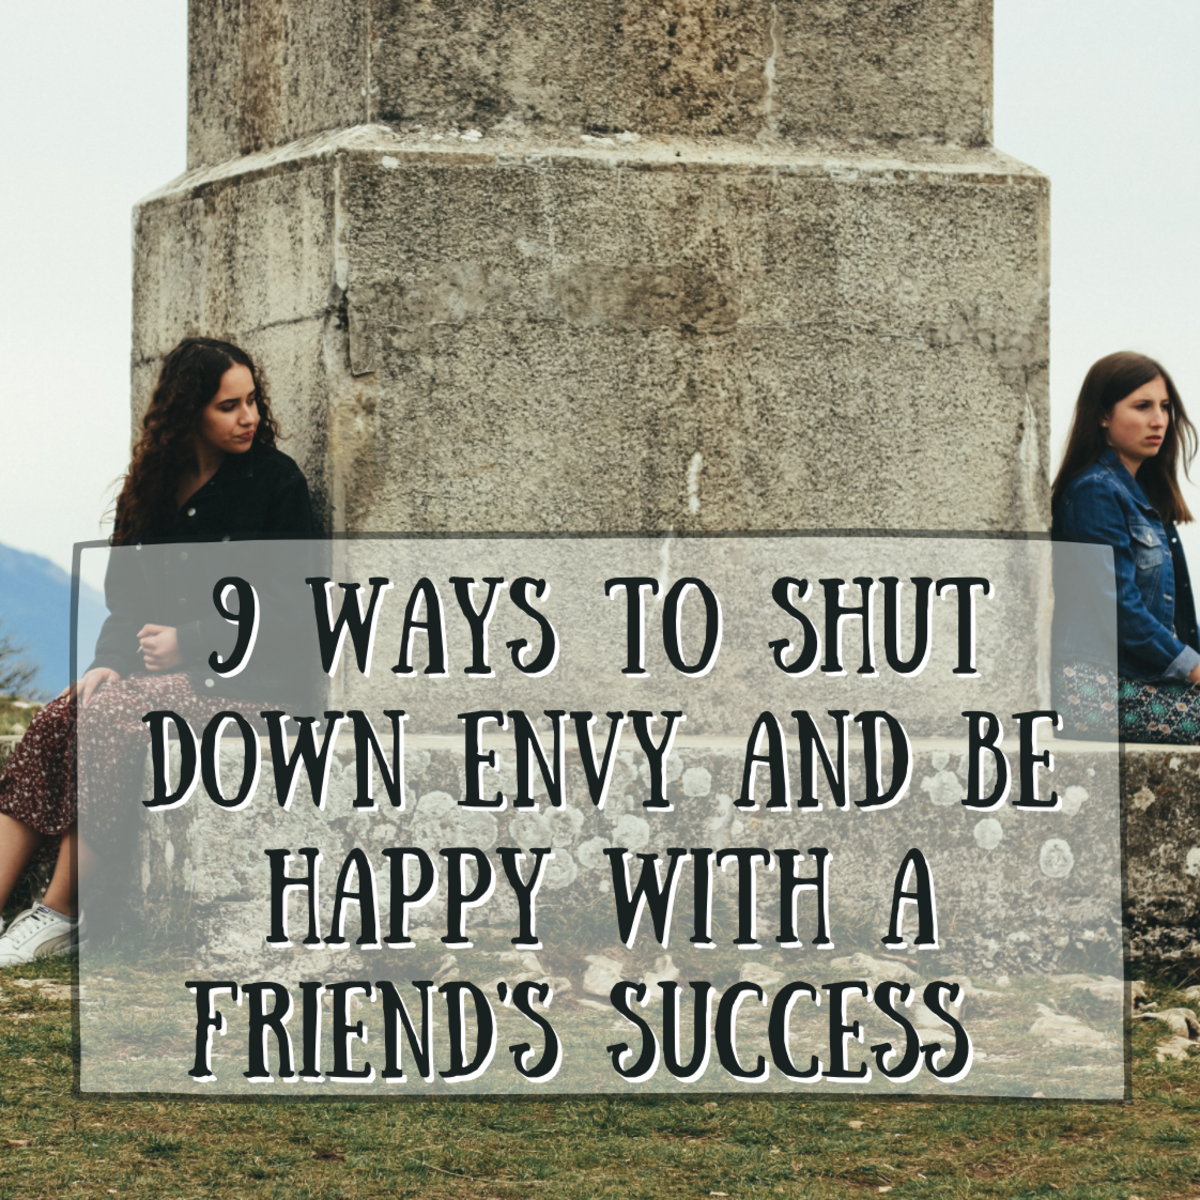 How to Not Be Jealous of Friends: 9 Ways to Avoid Envy